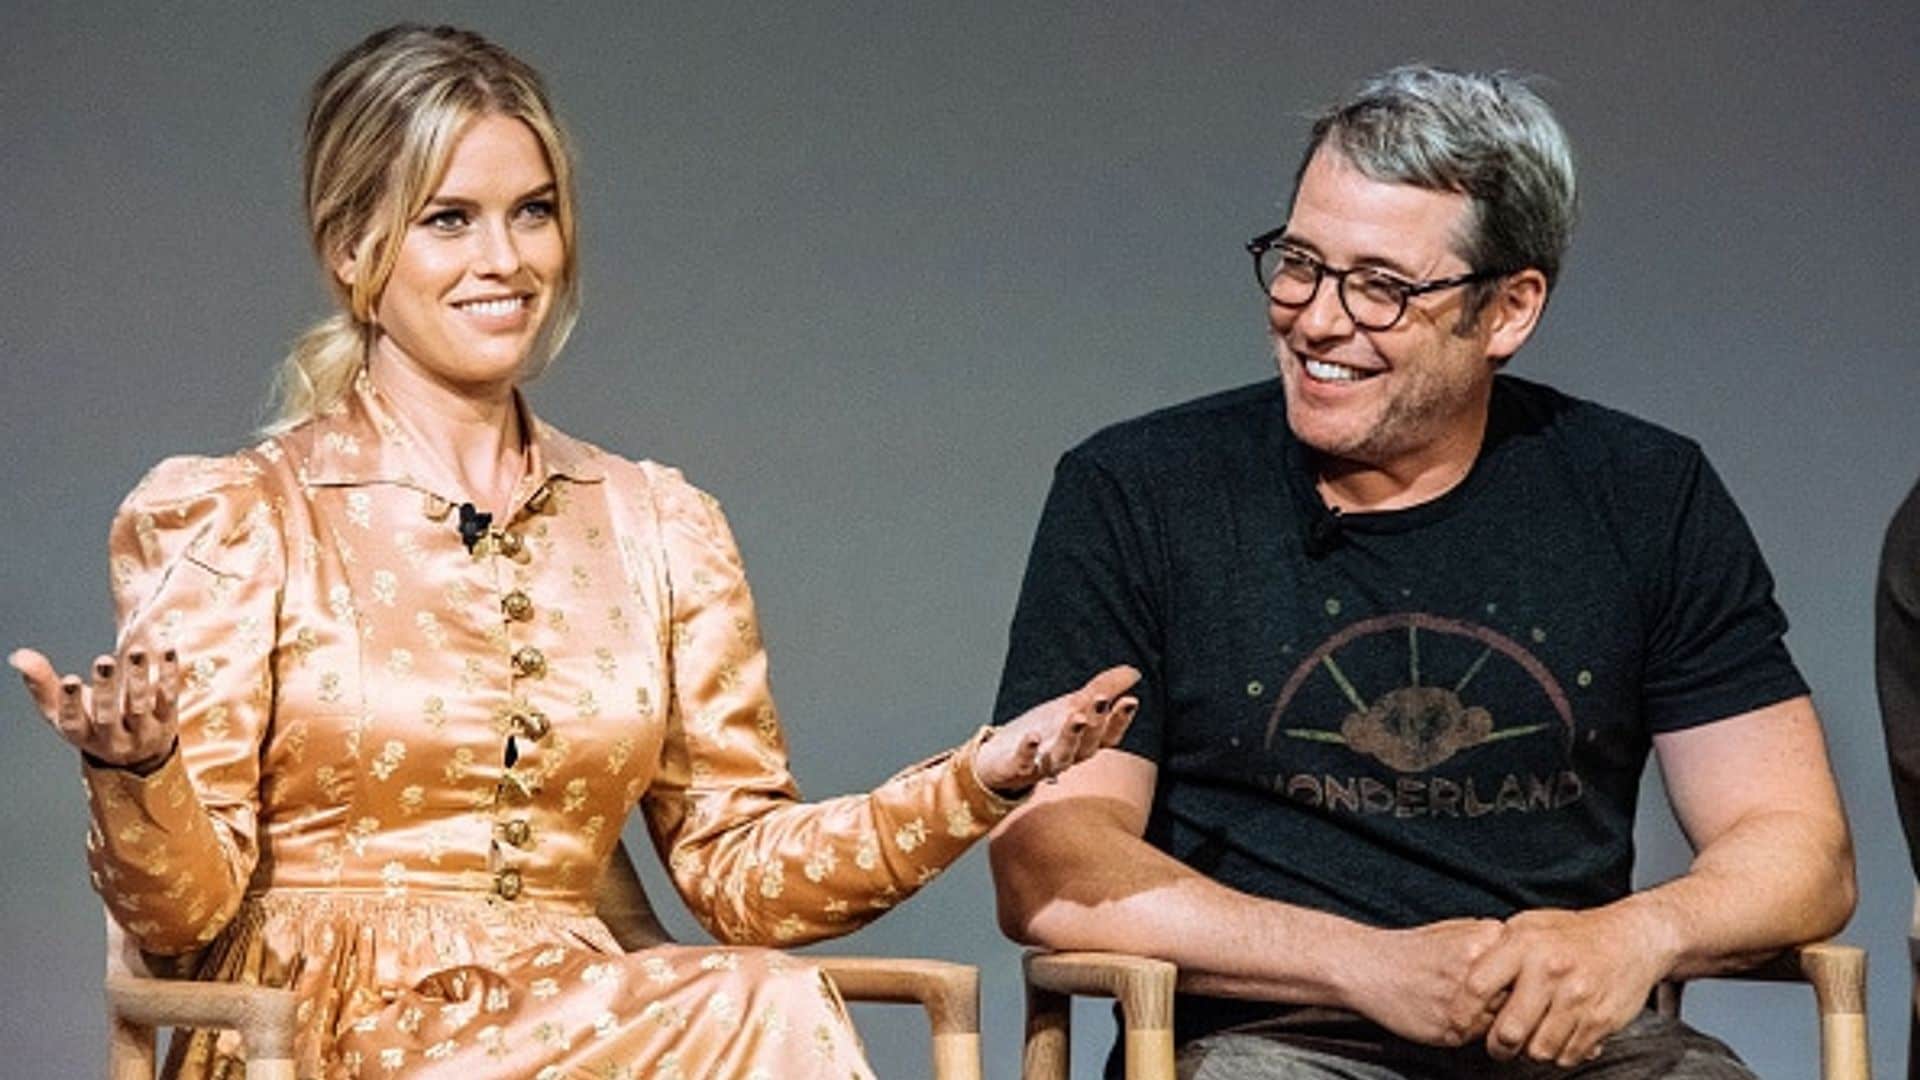 Matthew Broderick and Alice Eve were inseparable filming 'Dirty Weekend'